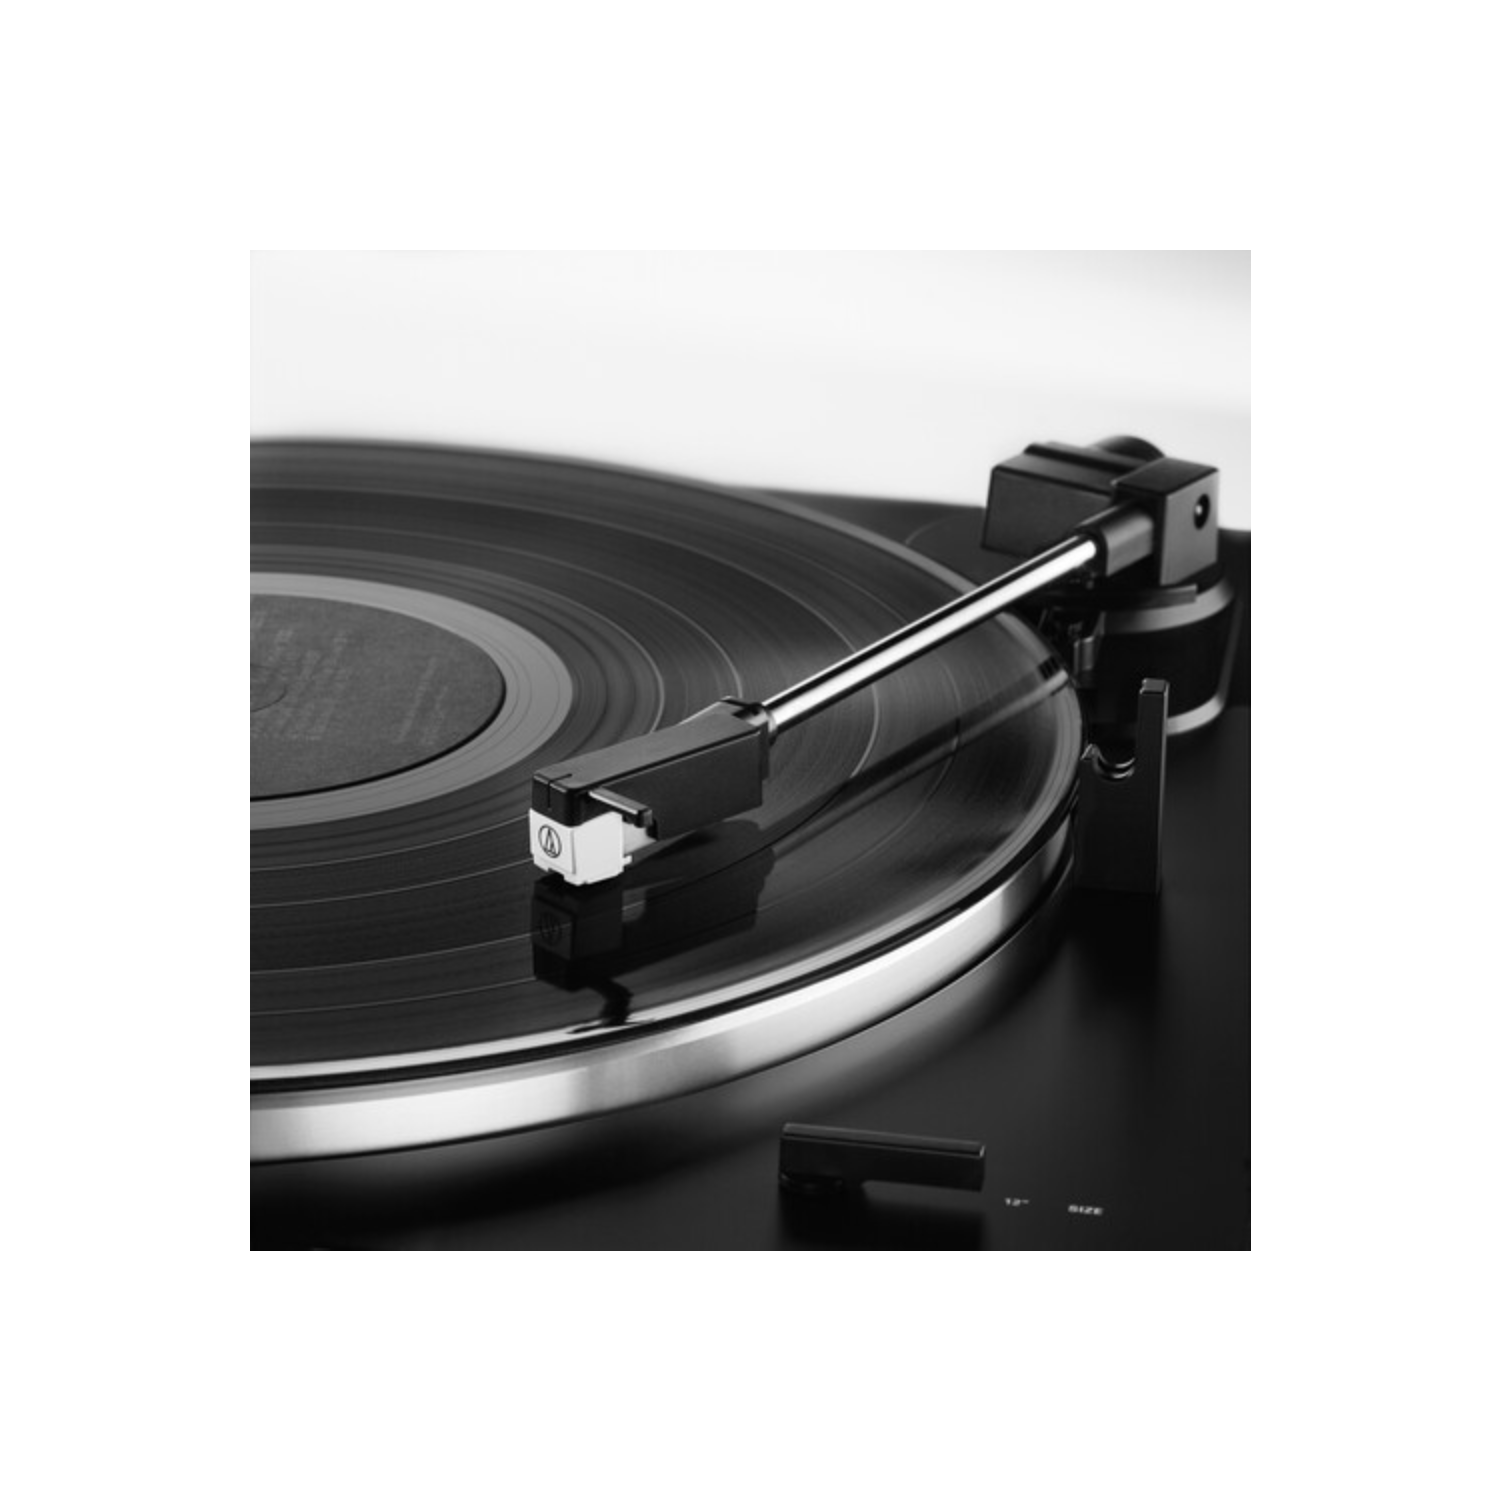 Audio-Technica Consumer AT-LP60X Stereo Turntable